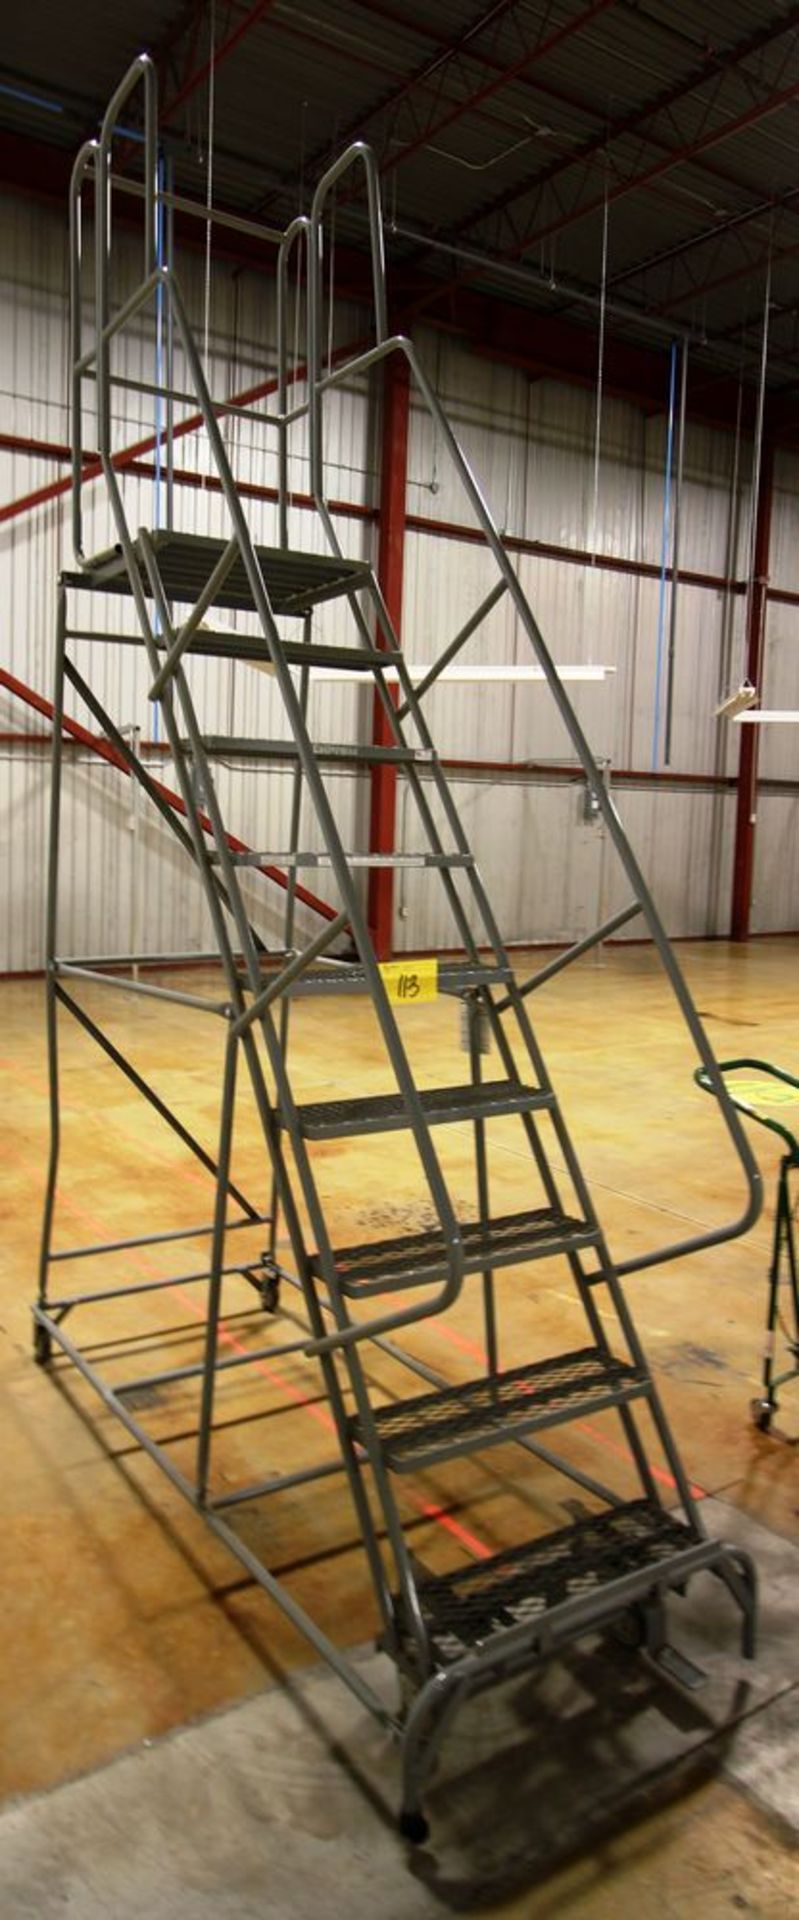 COTTERMAN 450LBS PORTABLE WAREHOUSE LADDER, S/N 0813 - Image 2 of 3